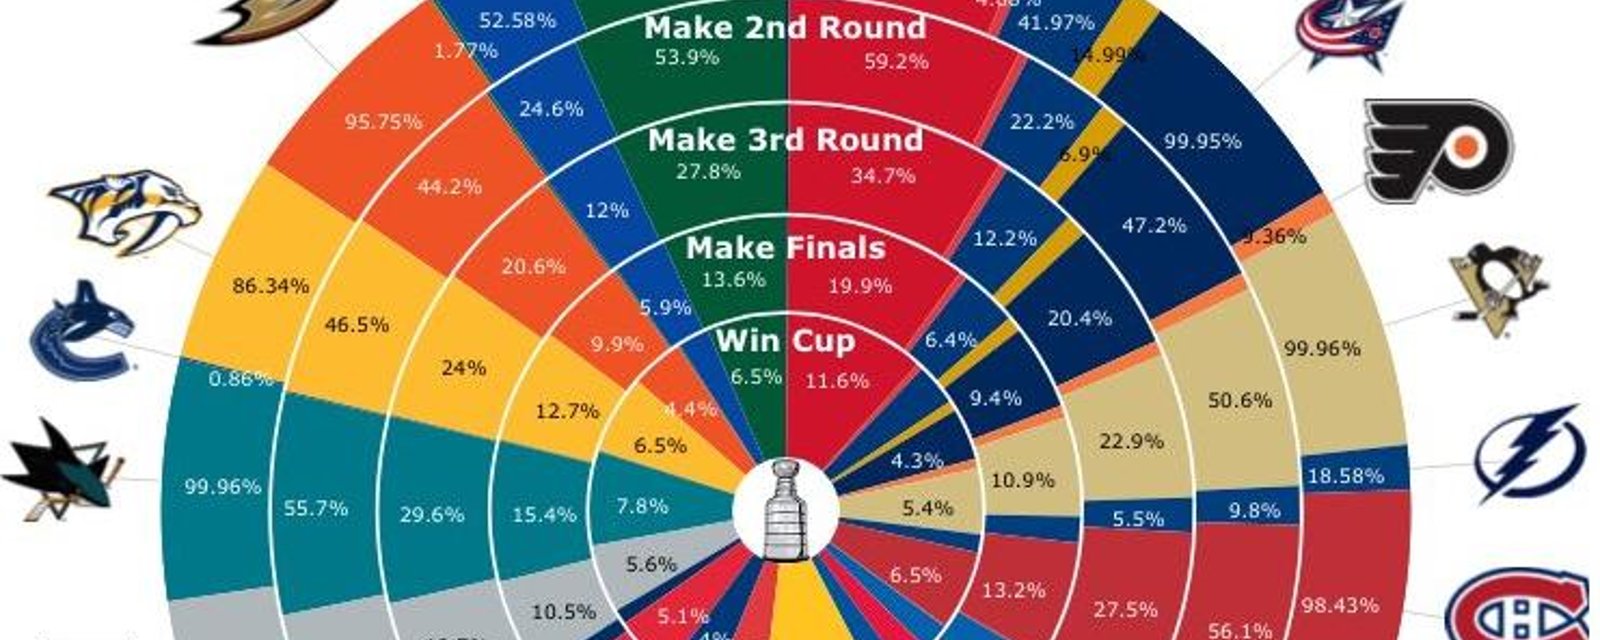 Each team's playoff odds in one simple graph! 